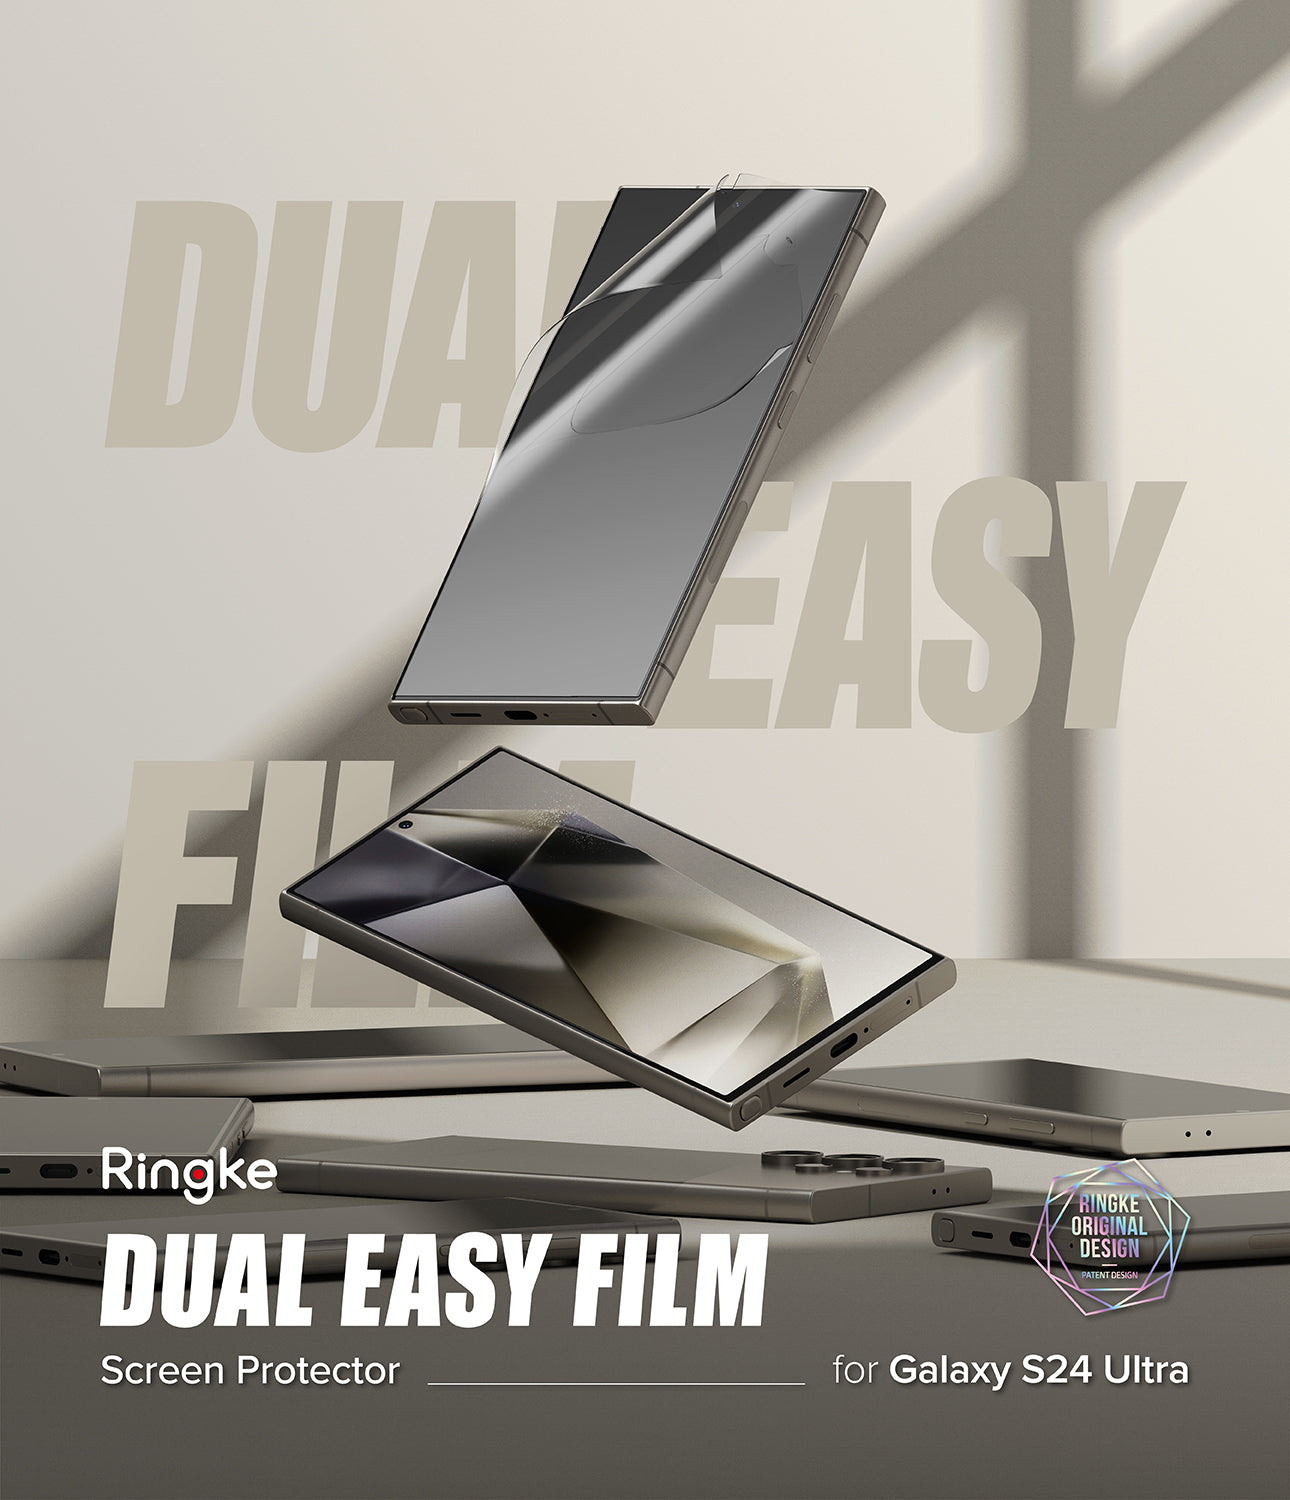 Galaxy S24 Ultra Screen Protector | Dual Easy Film [2 Pack] - By Ringke